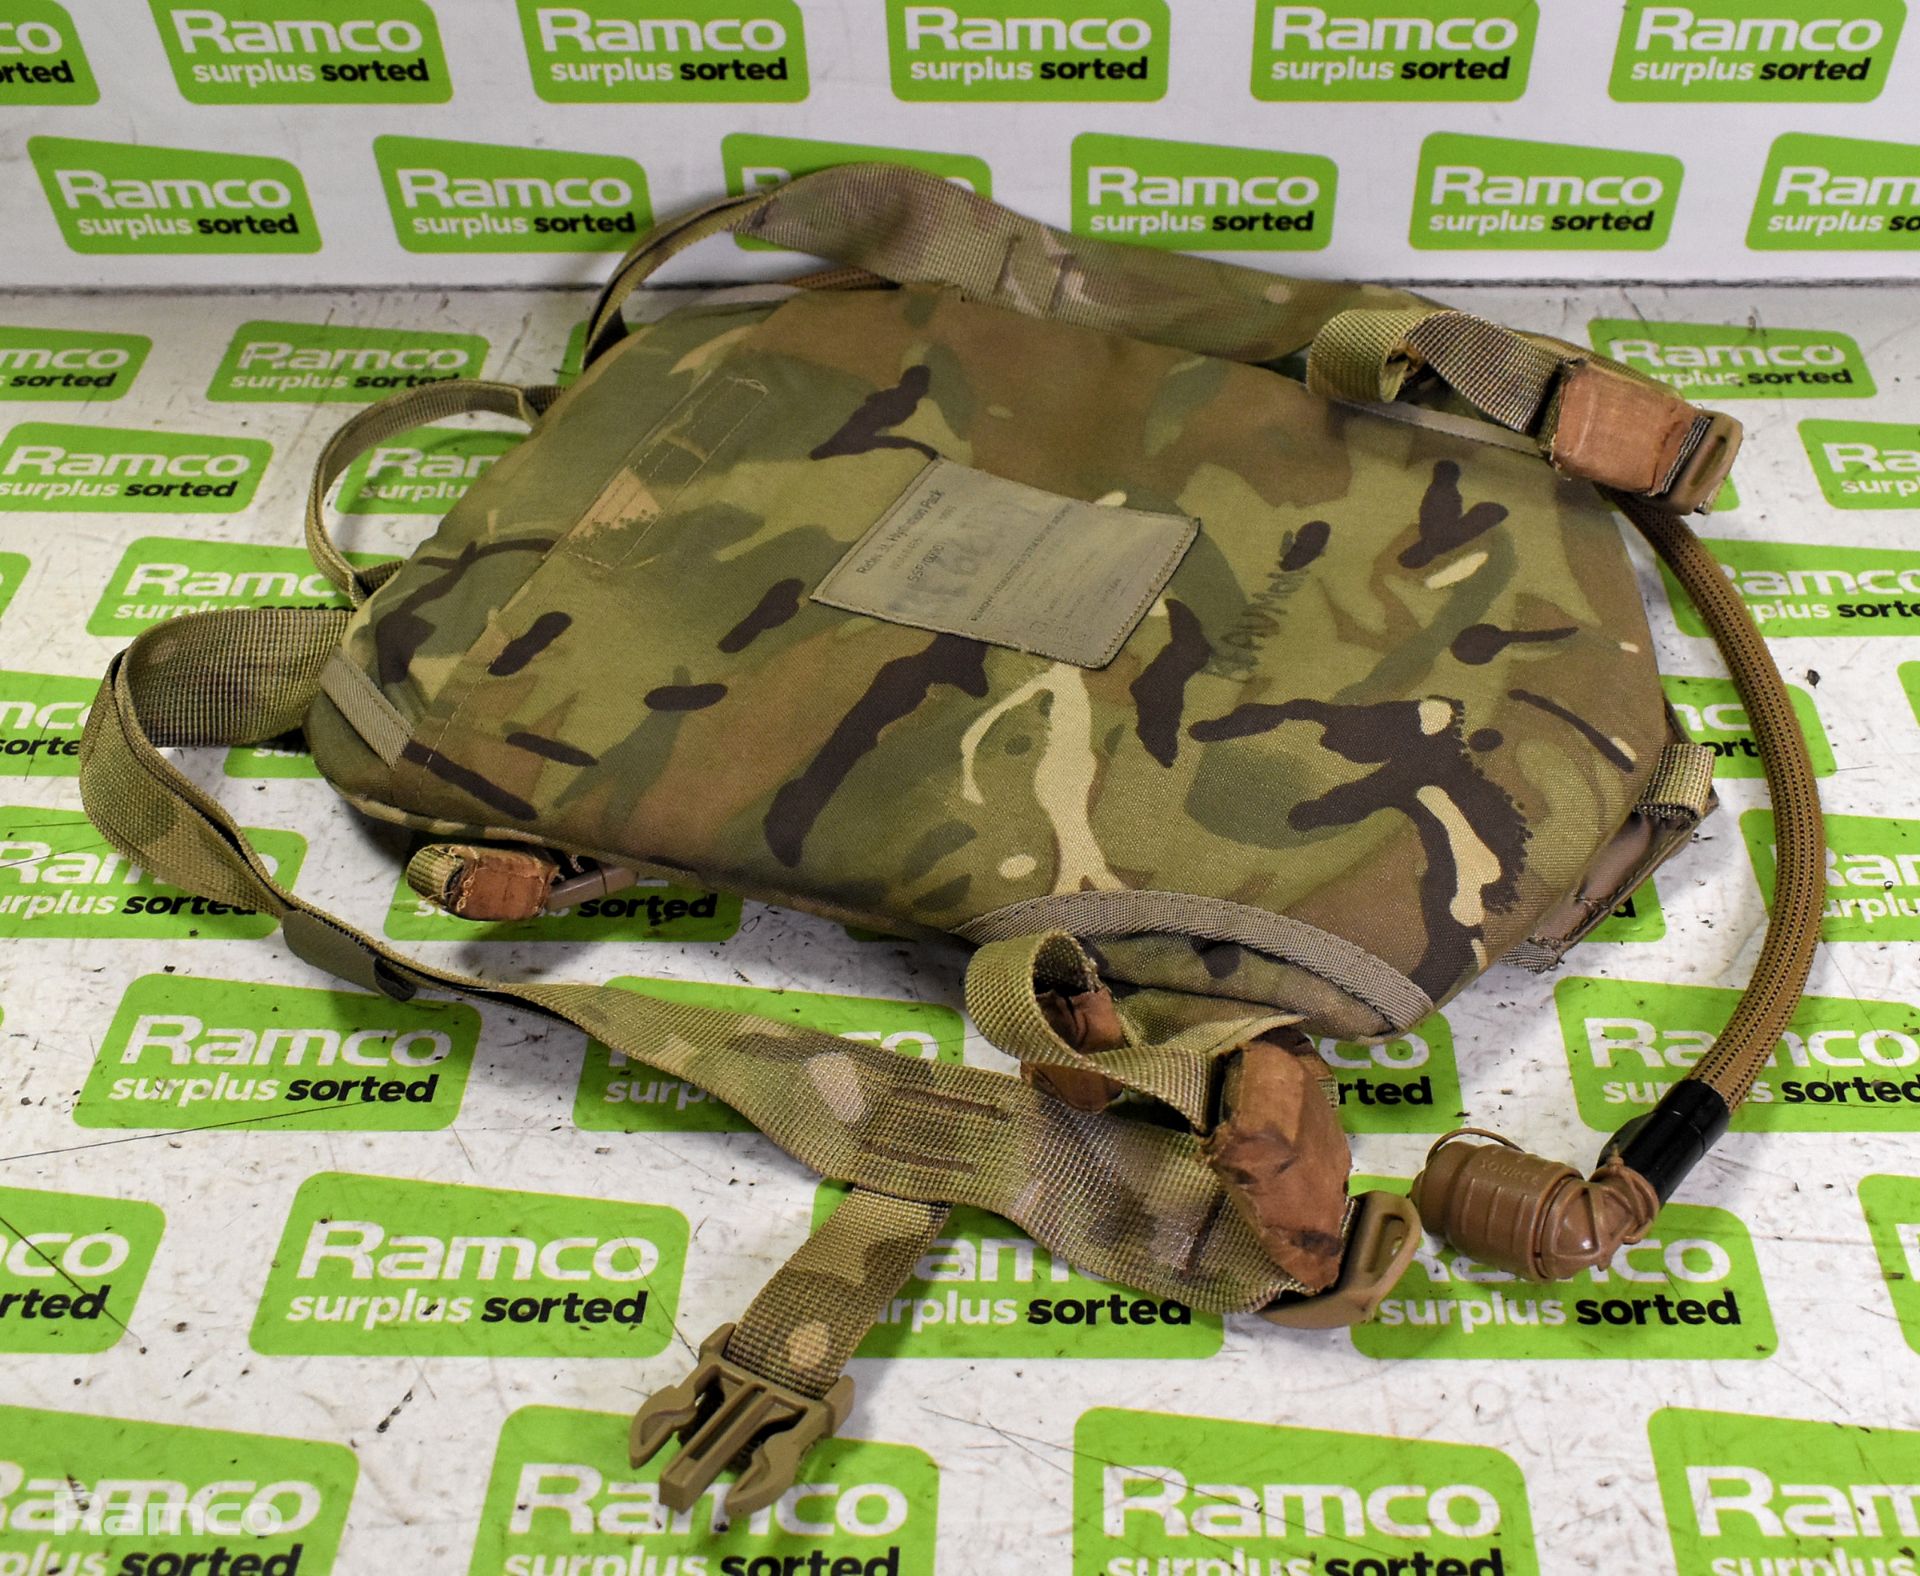 British Army cold weather caps, combat hats, 3L hydration packs - see description for details - Image 8 of 13